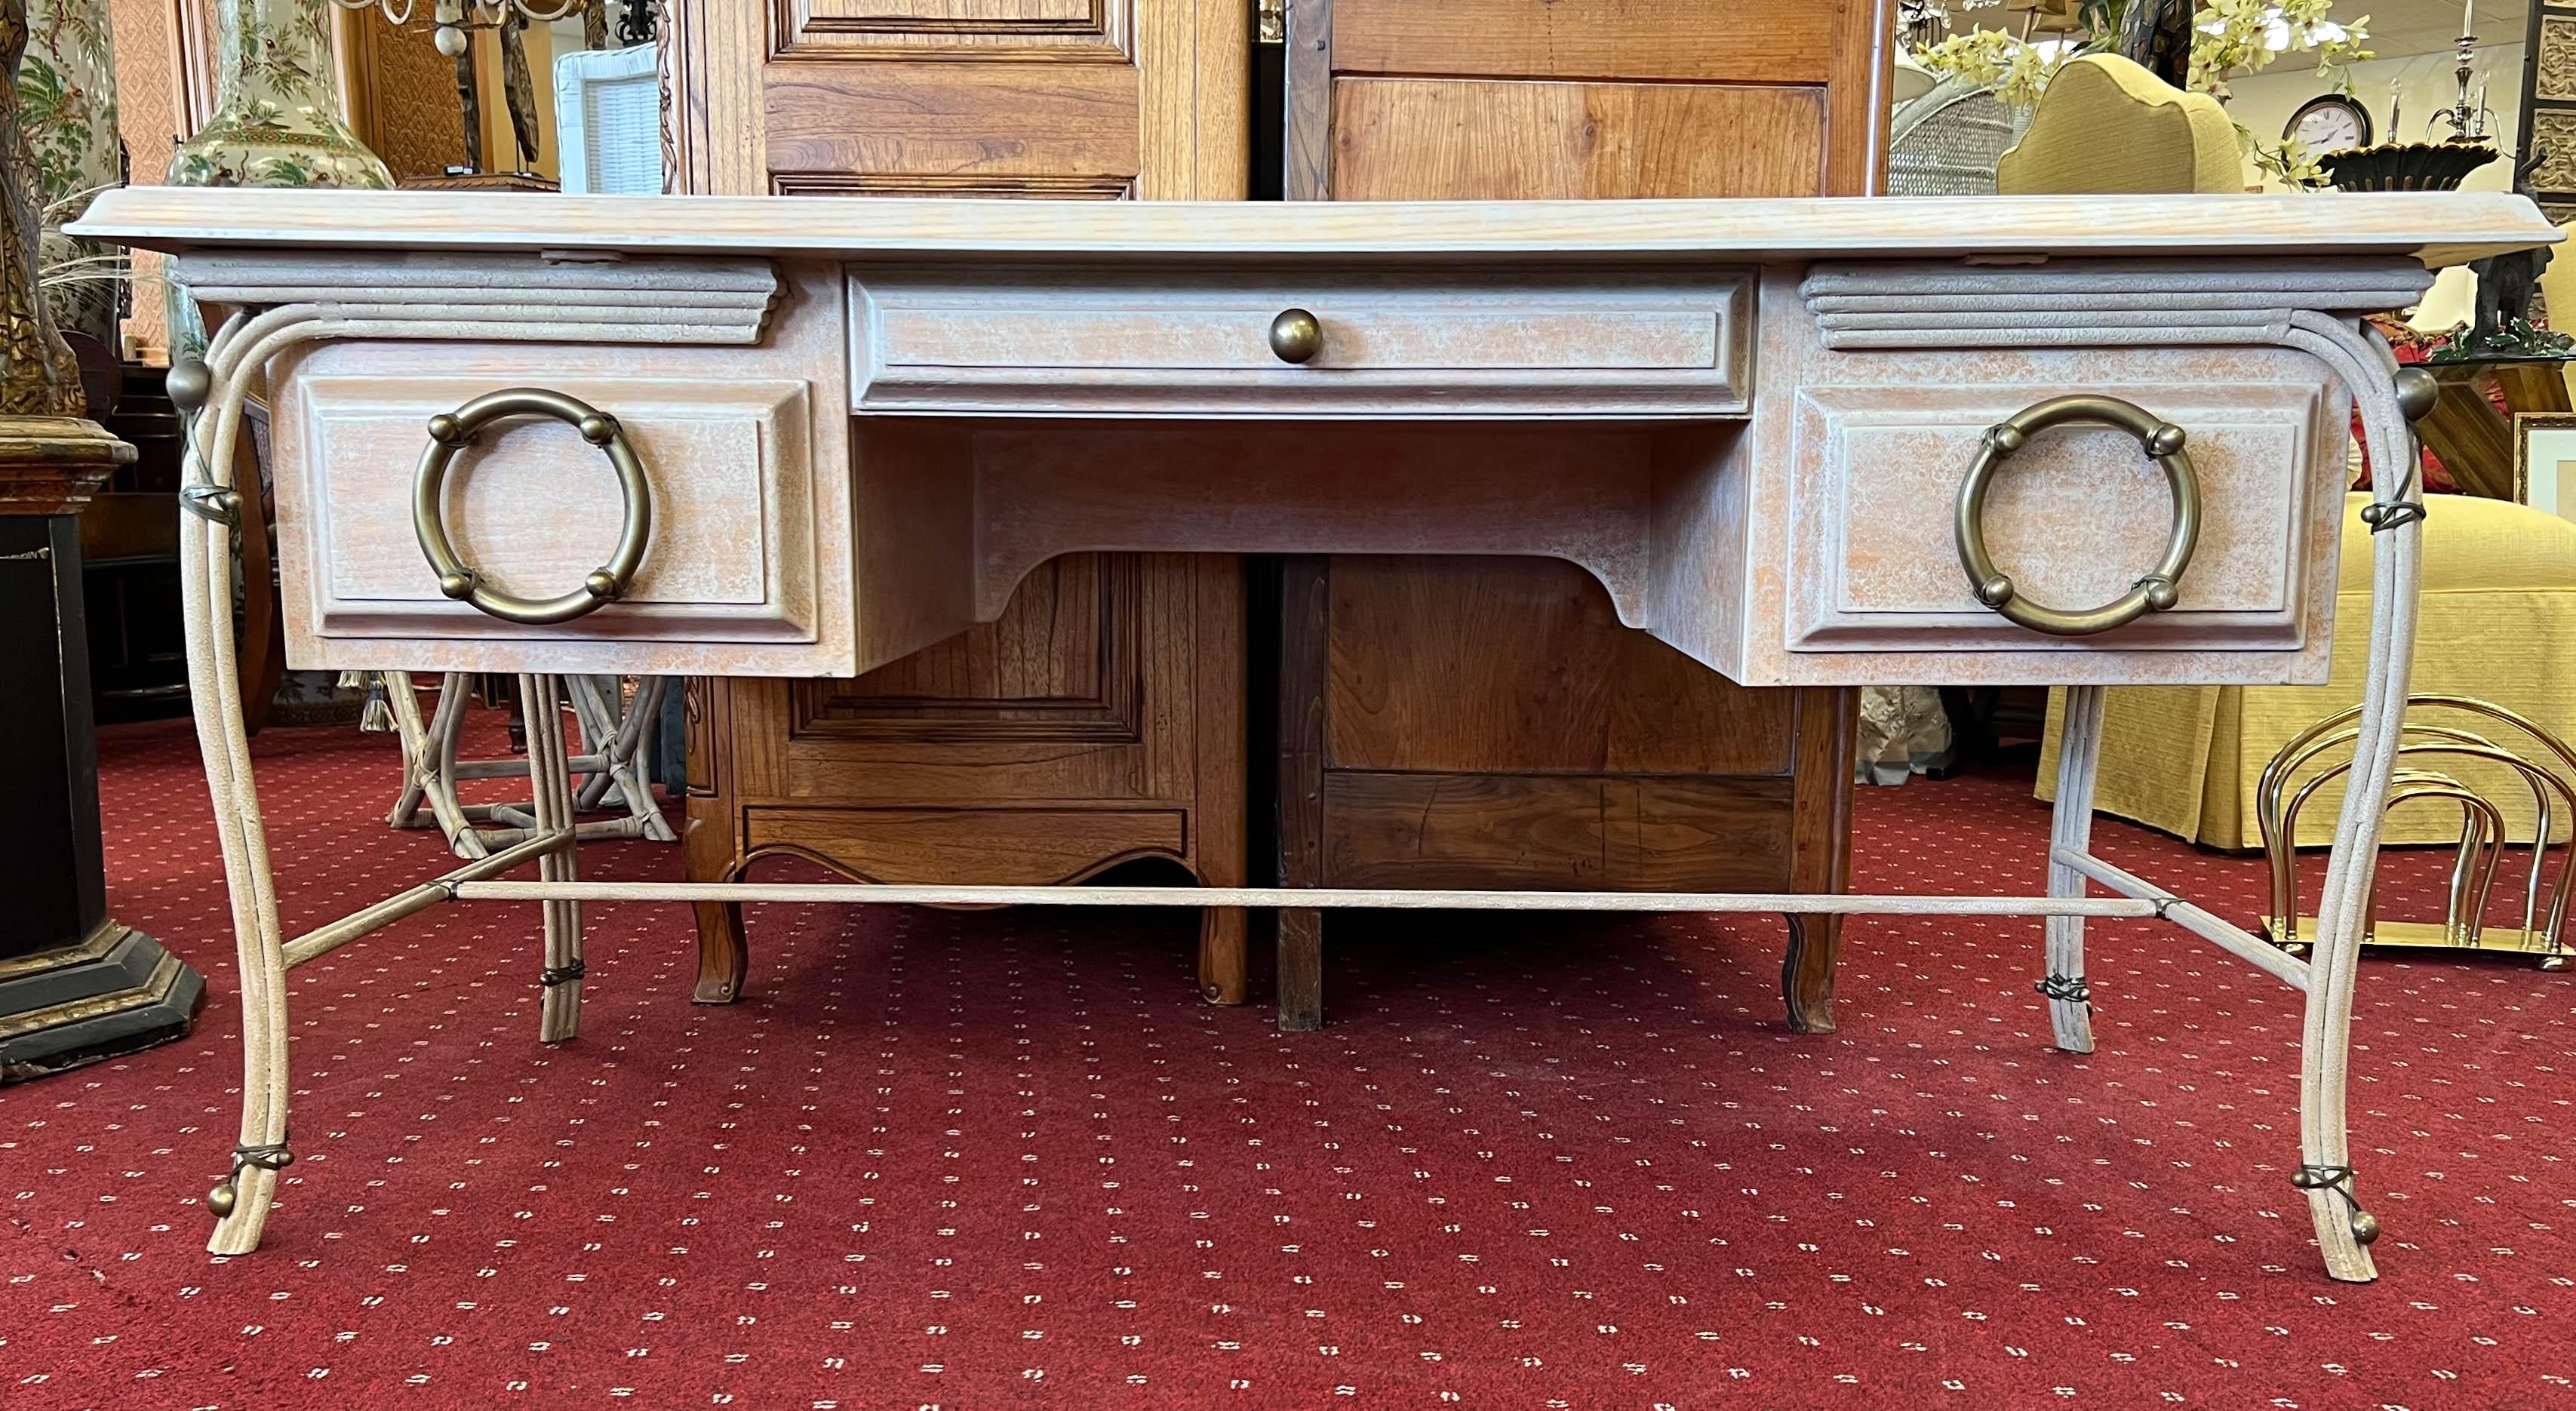 This desk harmoniously combines the strength of metal with the warmth of wood, creating a captivating juxtaposition of textures and hues. Features, such as the oversized brass ship wheel drawer pull and metal-wrapped accents, add character and lend